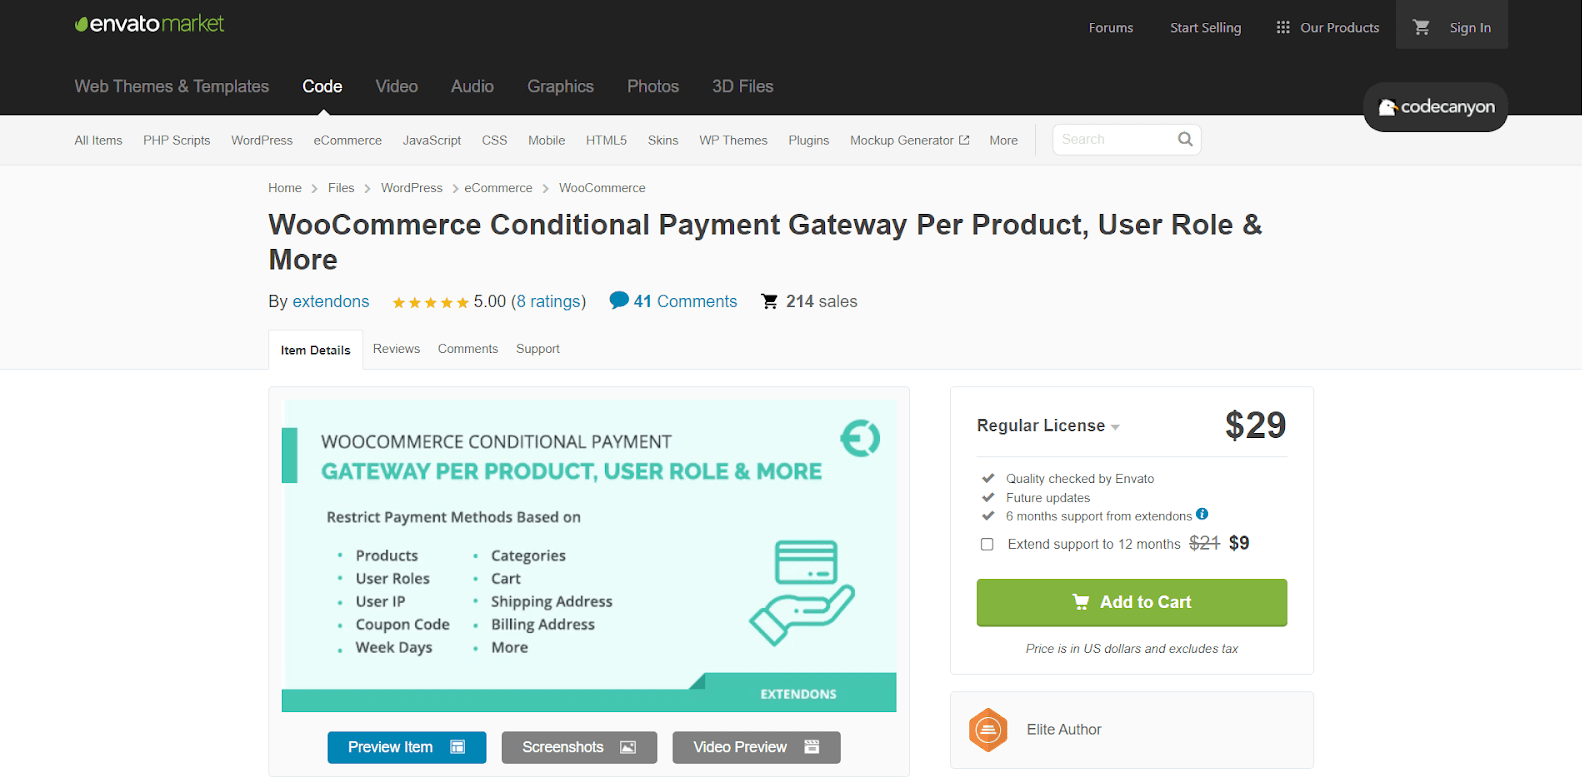 WooCommerce Conditional Payment Gateway Per Product, User Role & More